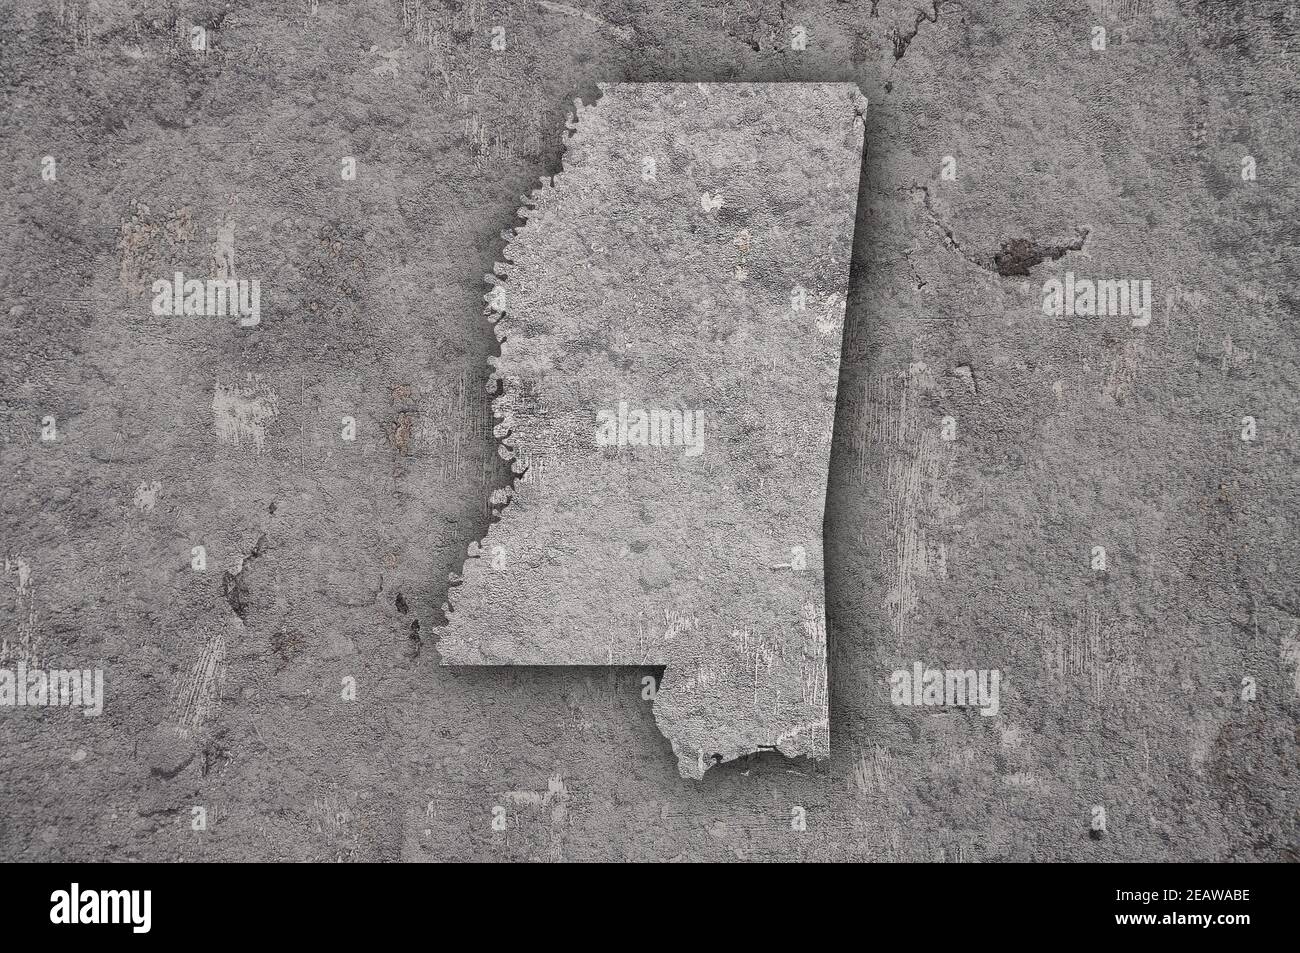 Map of Mississippi on weathered concrete Stock Photo